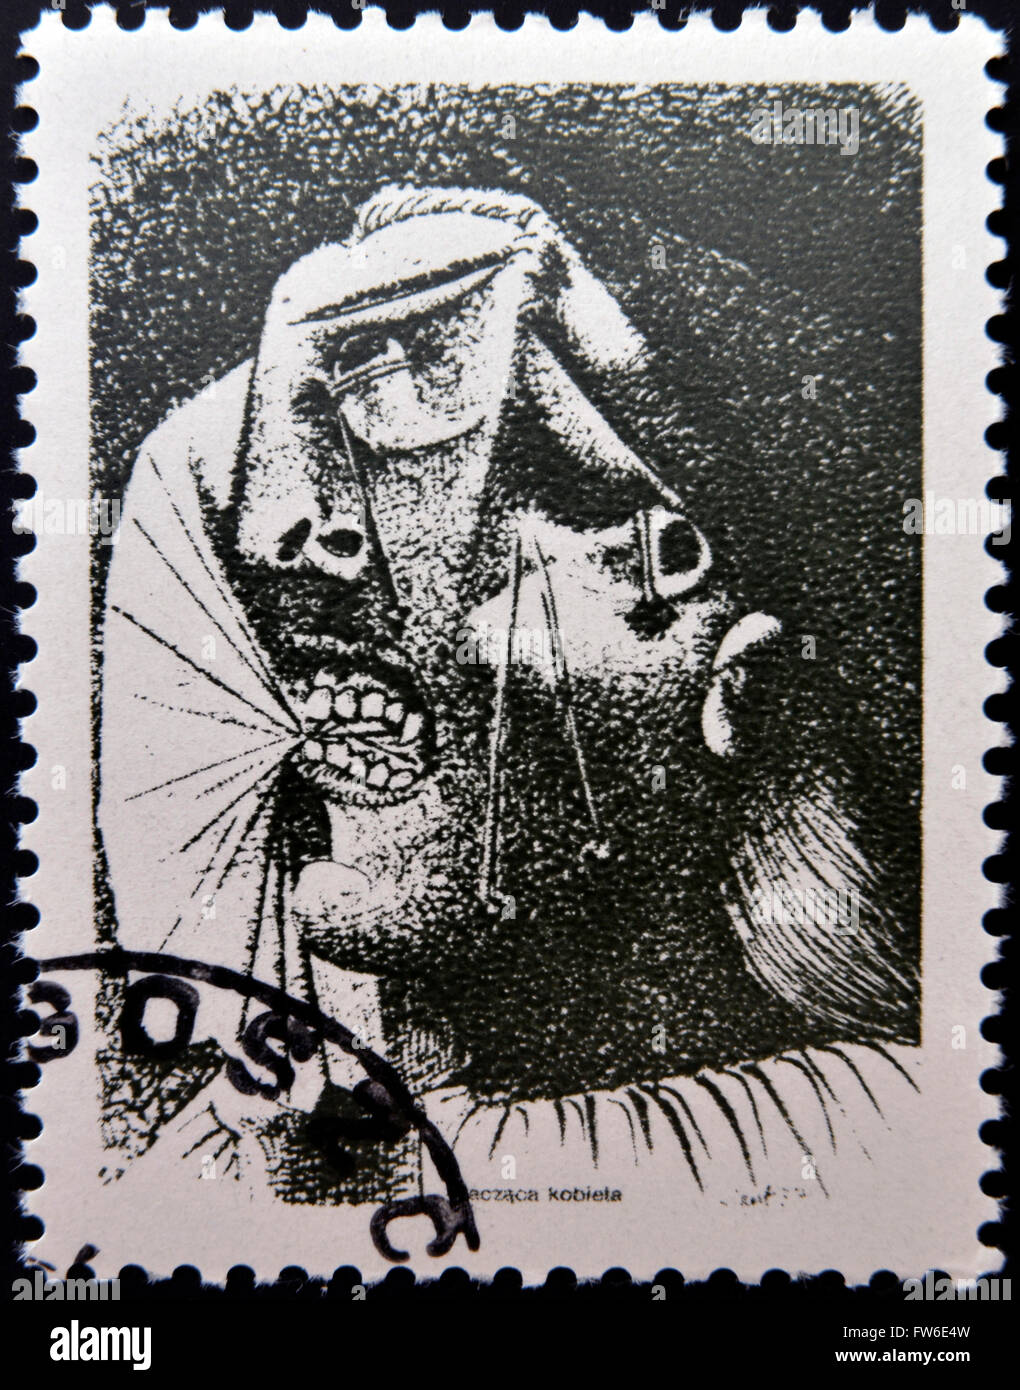 POLAND - CIRCA 1981: A stamp printed in Poland shows  A Crying Woman by Pablo Picasso, circa 1981 Stock Photo